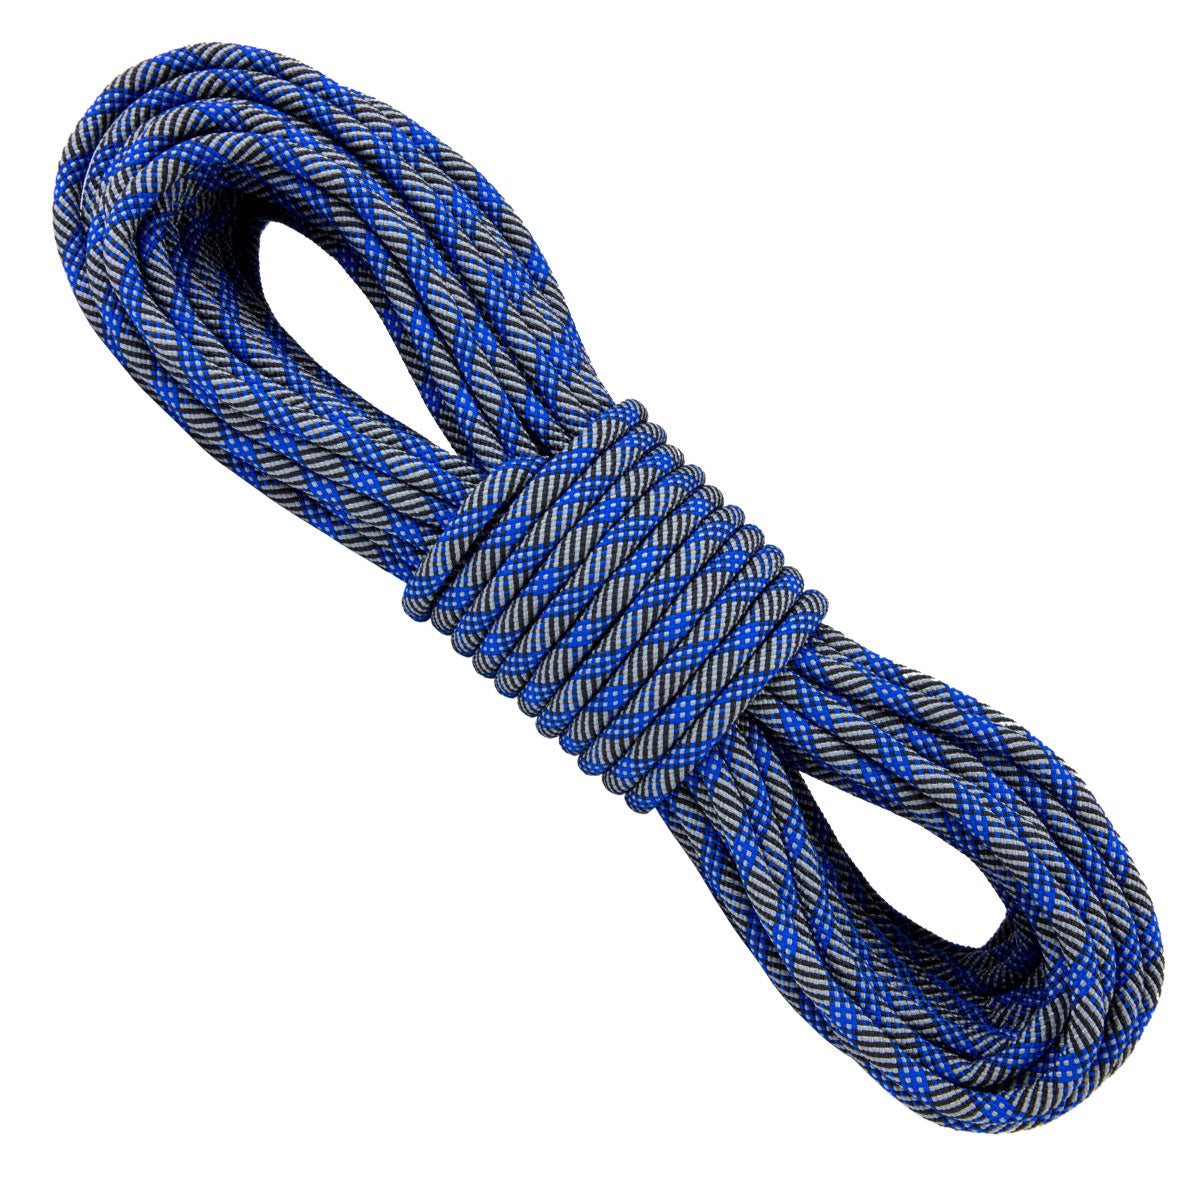 3/8 - Thin Blue Line – Atwood Rope MFG